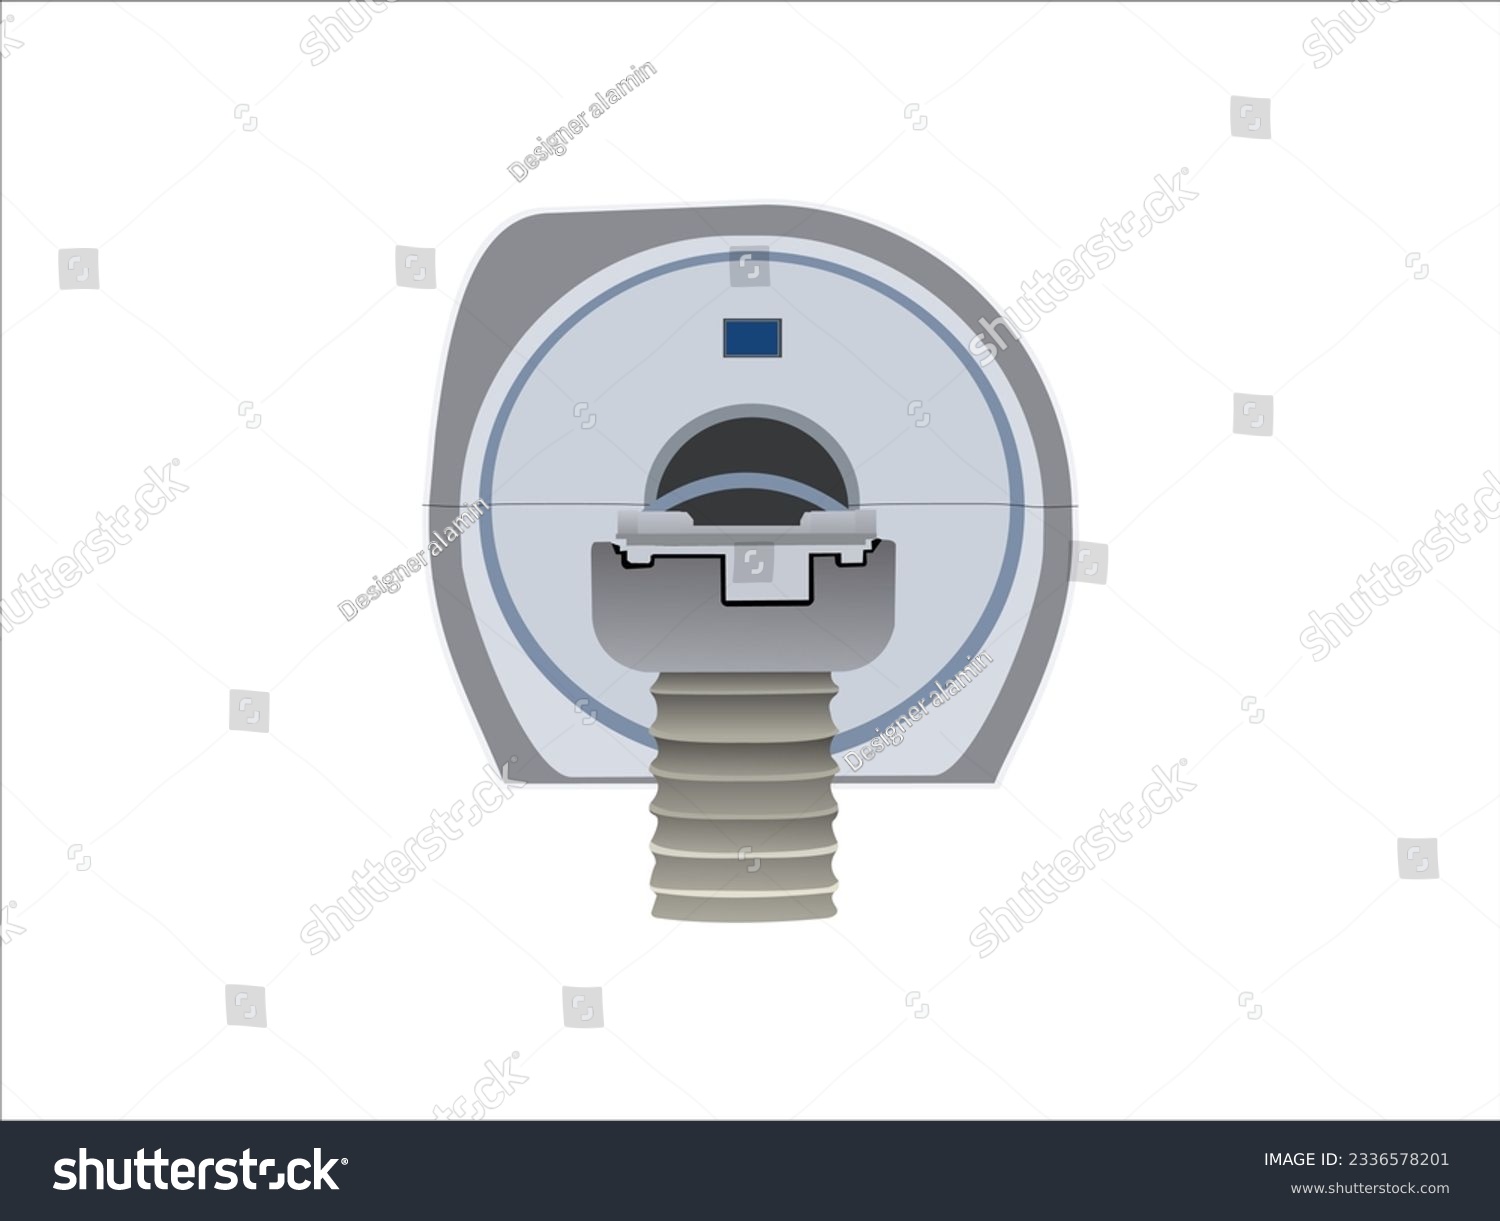 SVG of male patient undergoing test at ct scanner machine, lab with mri scan machine, CT (Computed tomography) scanner in hospital laboratory. CT scan an advance technology for medical diagnosis. svg